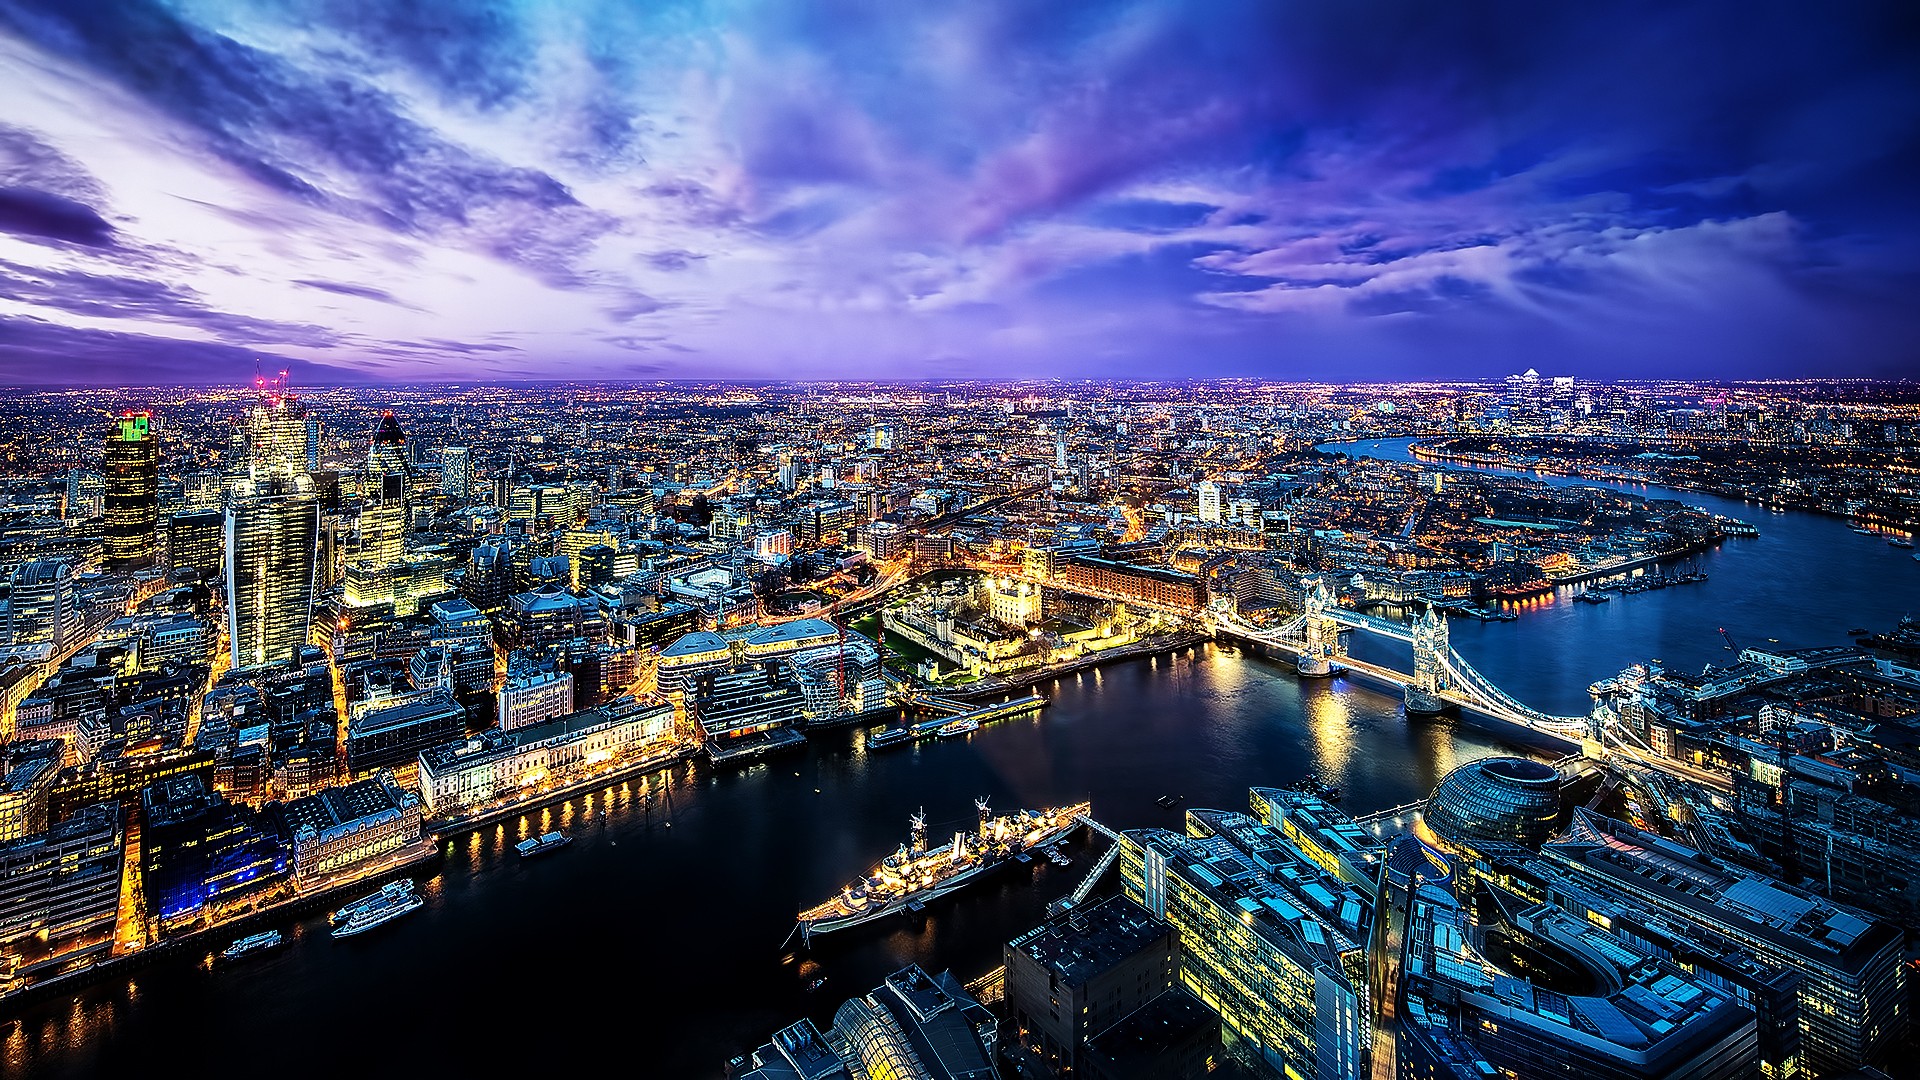 General 1920x1080 London city cityscape UK England city lights panorama sky River Thames